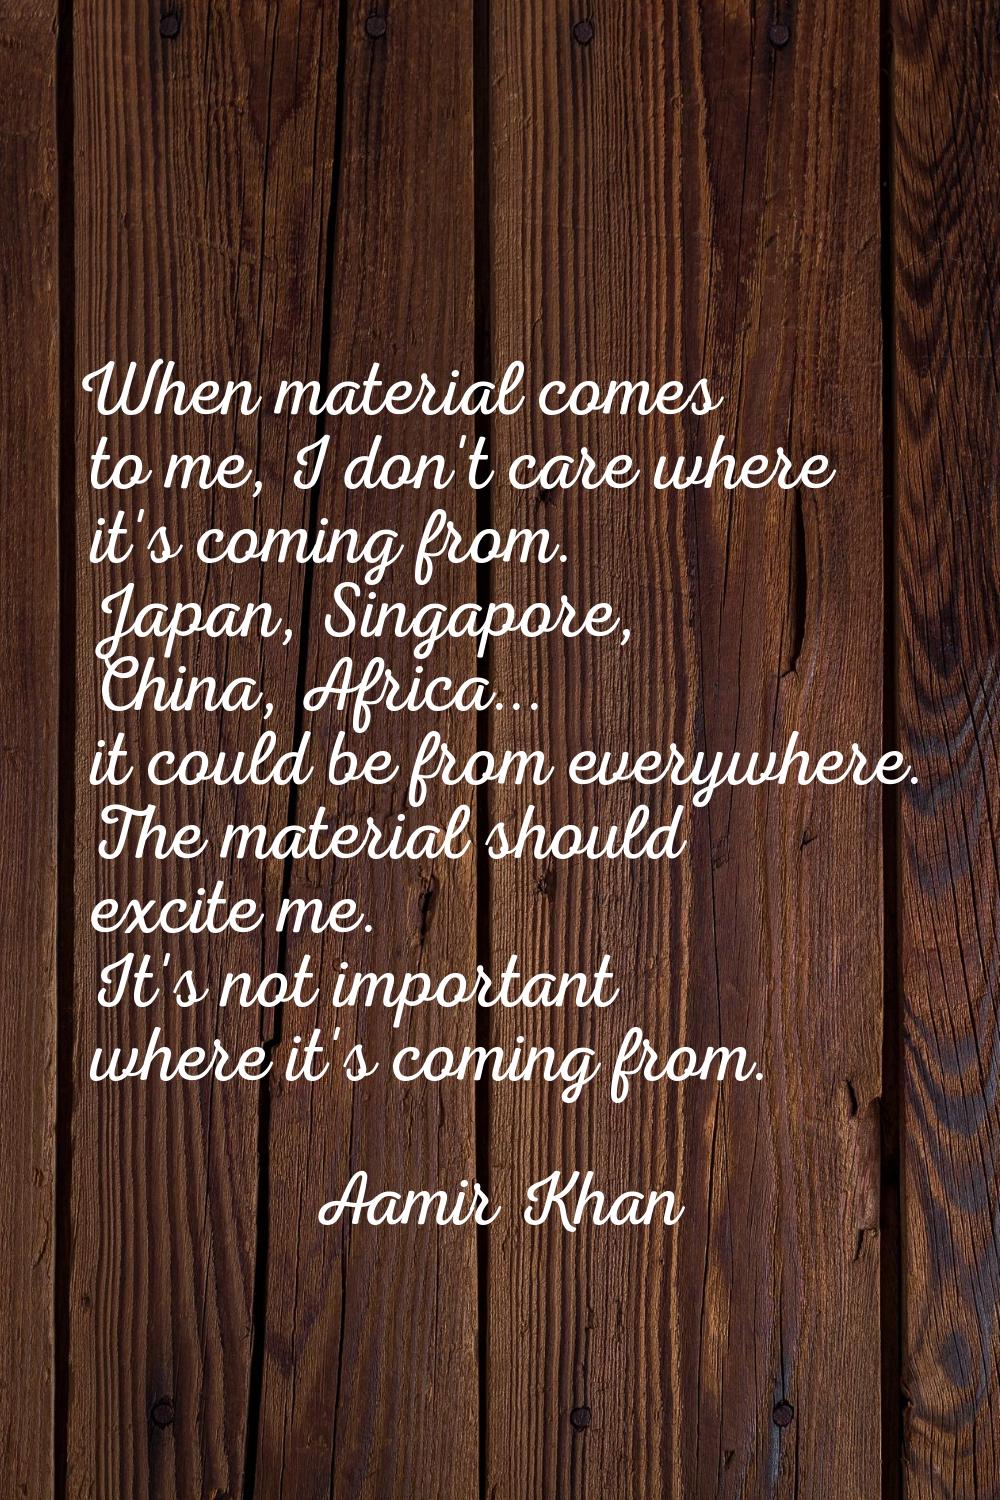 When material comes to me, I don't care where it's coming from. Japan, Singapore, China, Africa... 